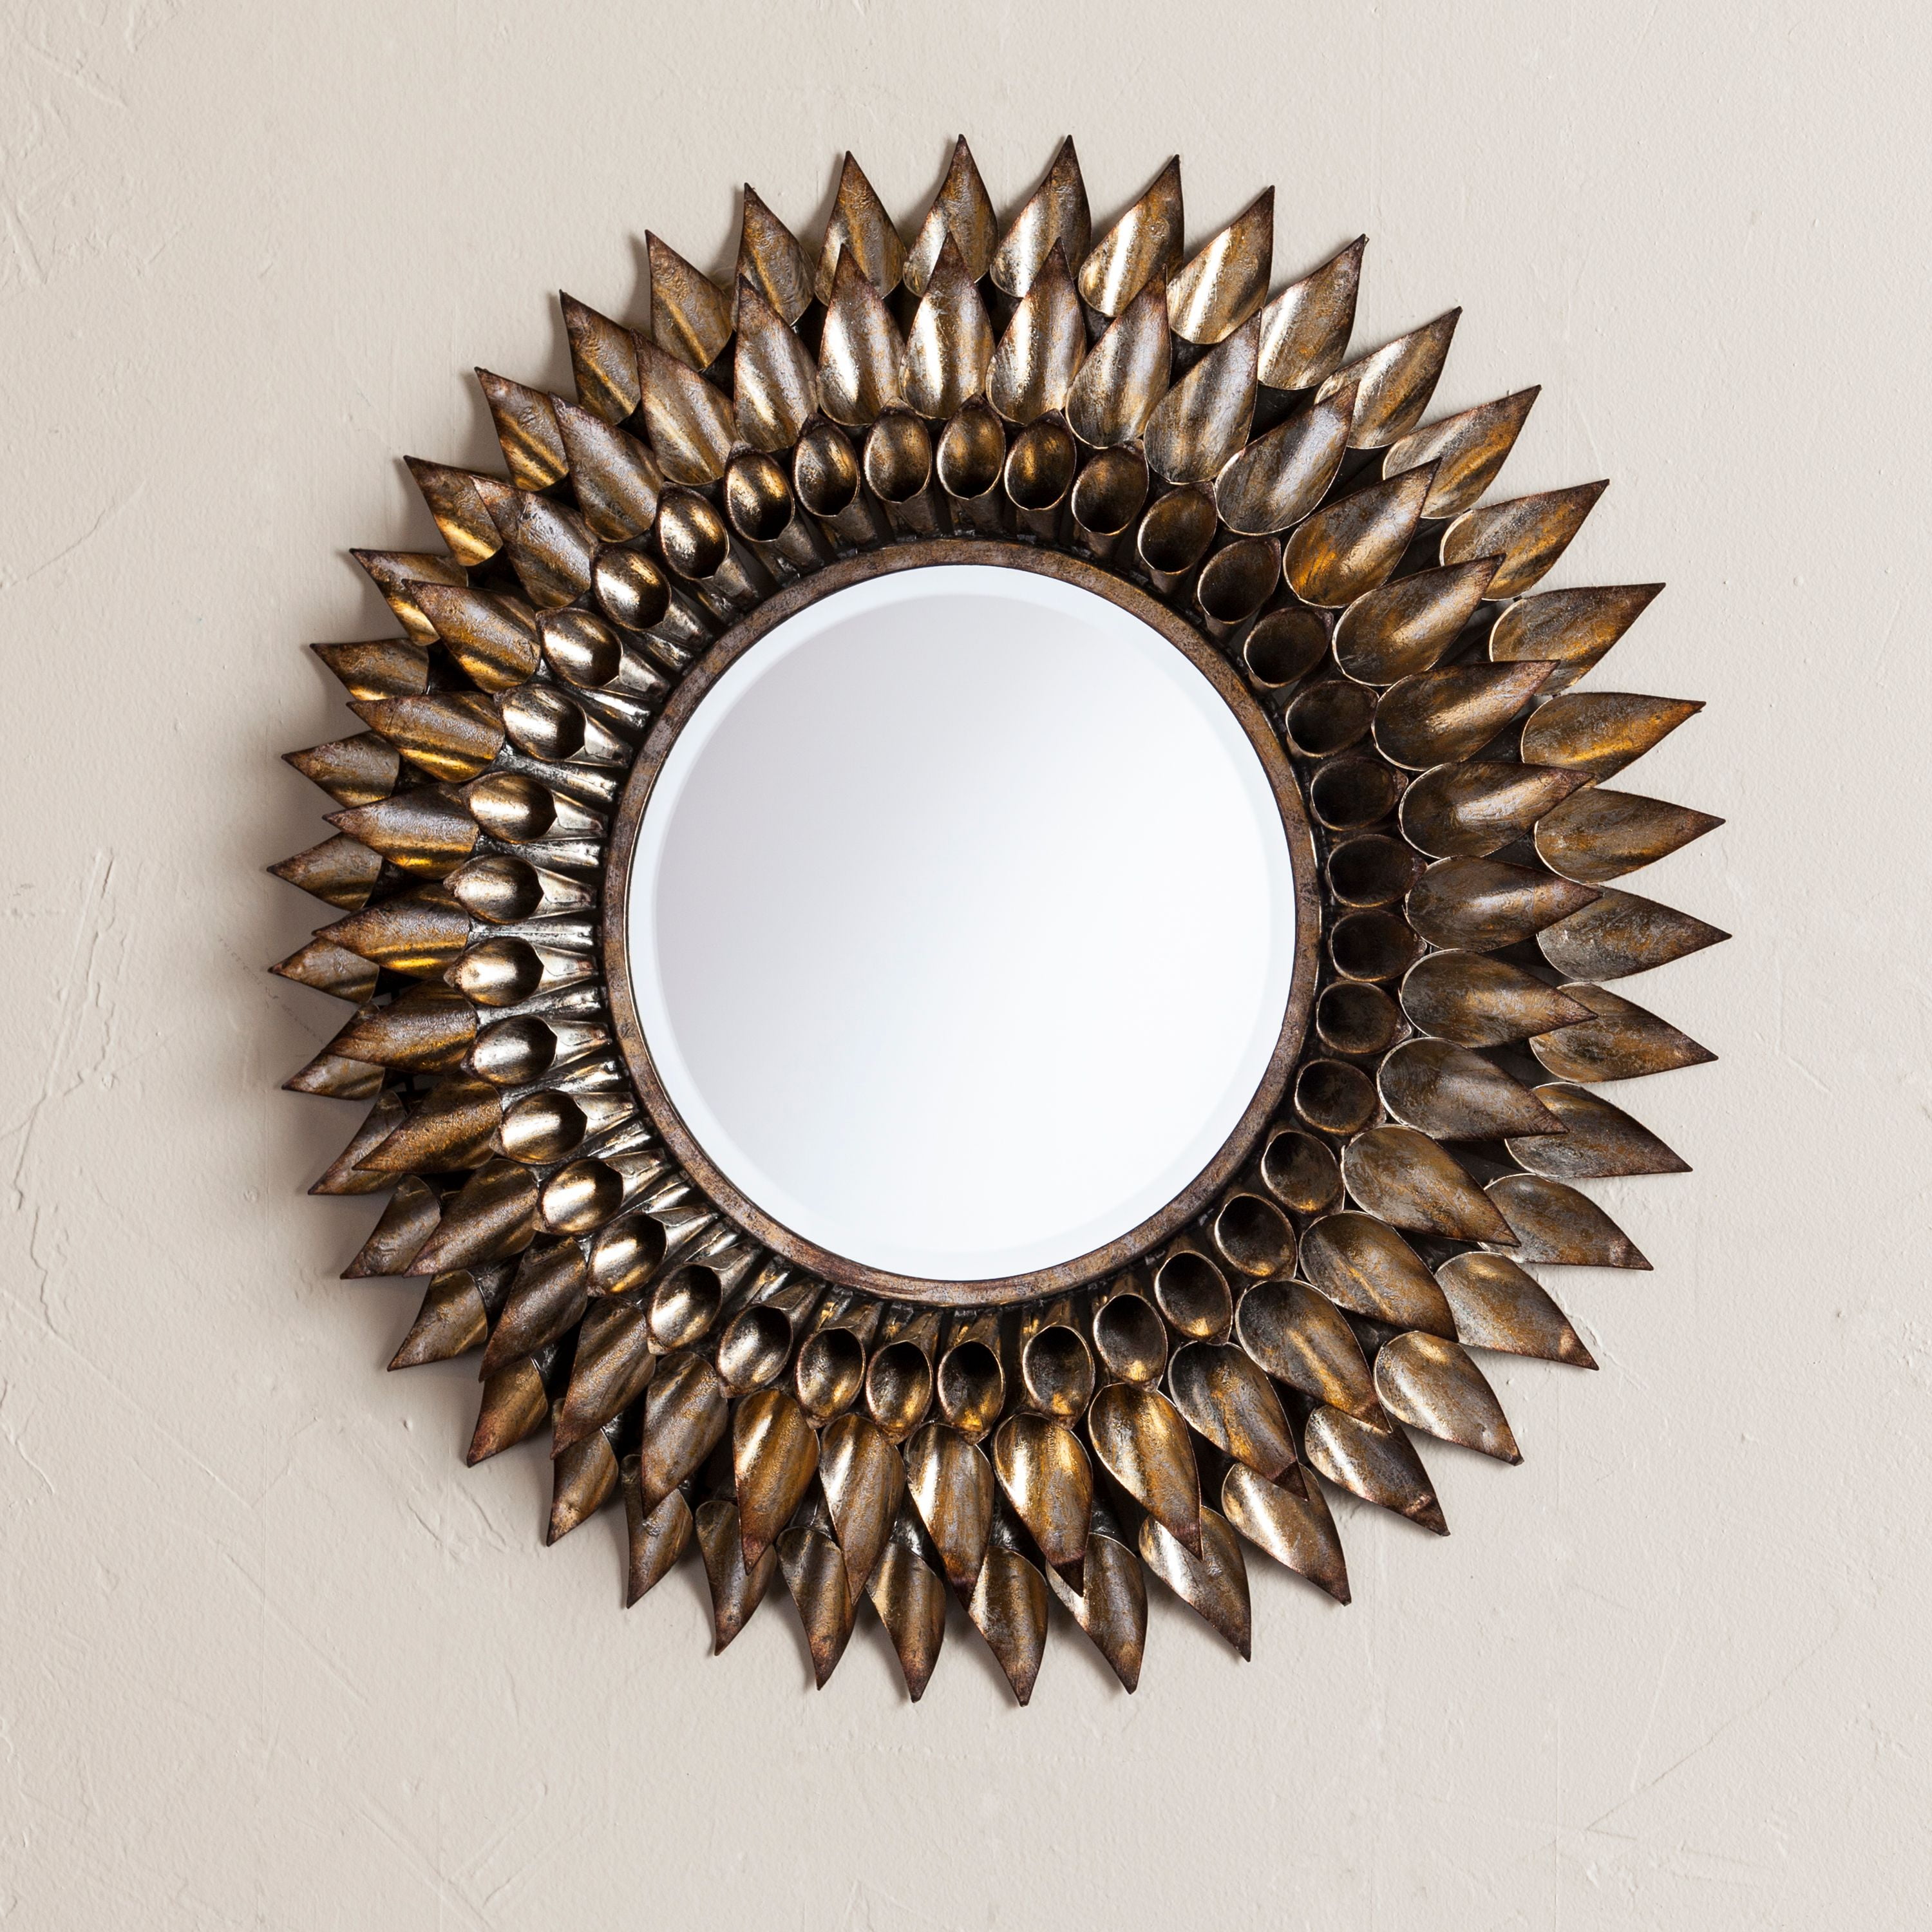 Southern Enterprises Small Round Wall Mirror, Clear